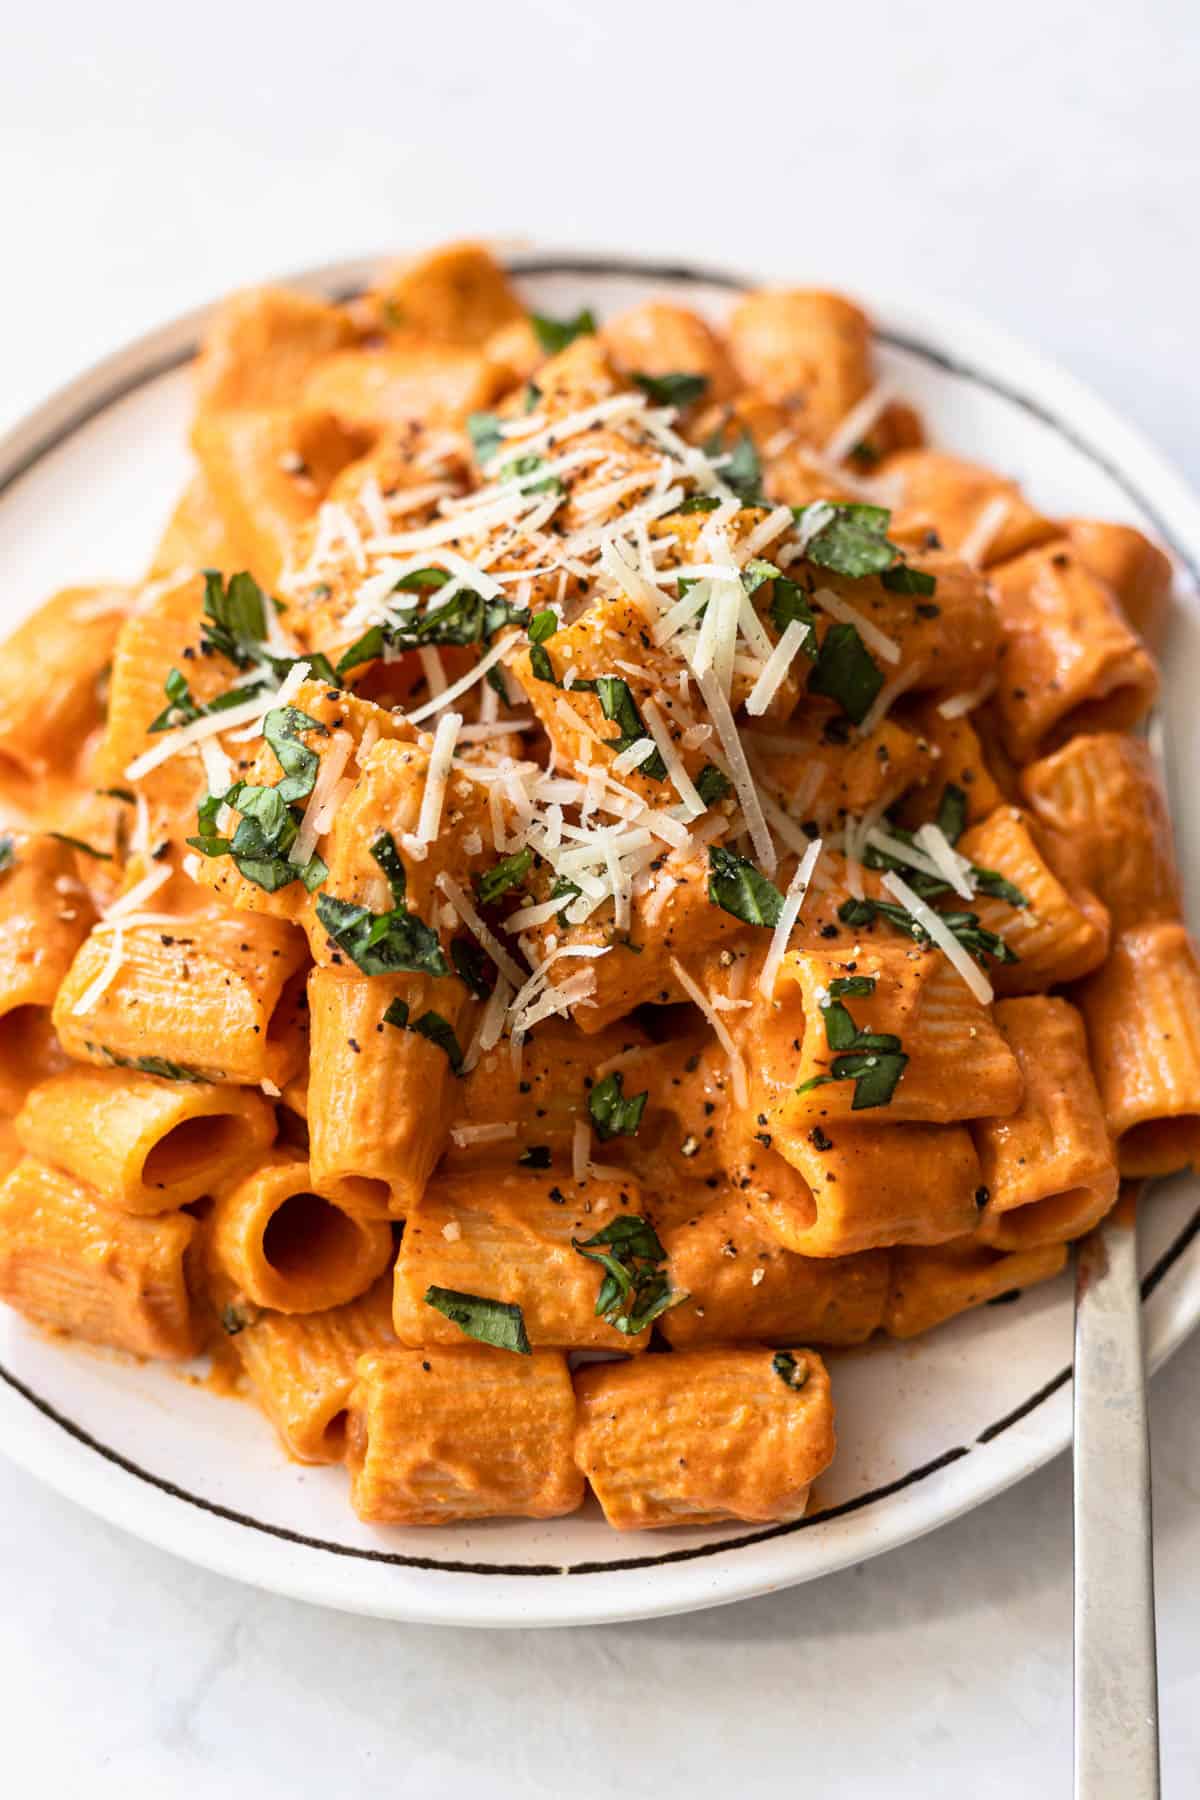 rigatoni tossed in pink sauce topped with shredded parmesan cheese and fresh basil on a white plate.